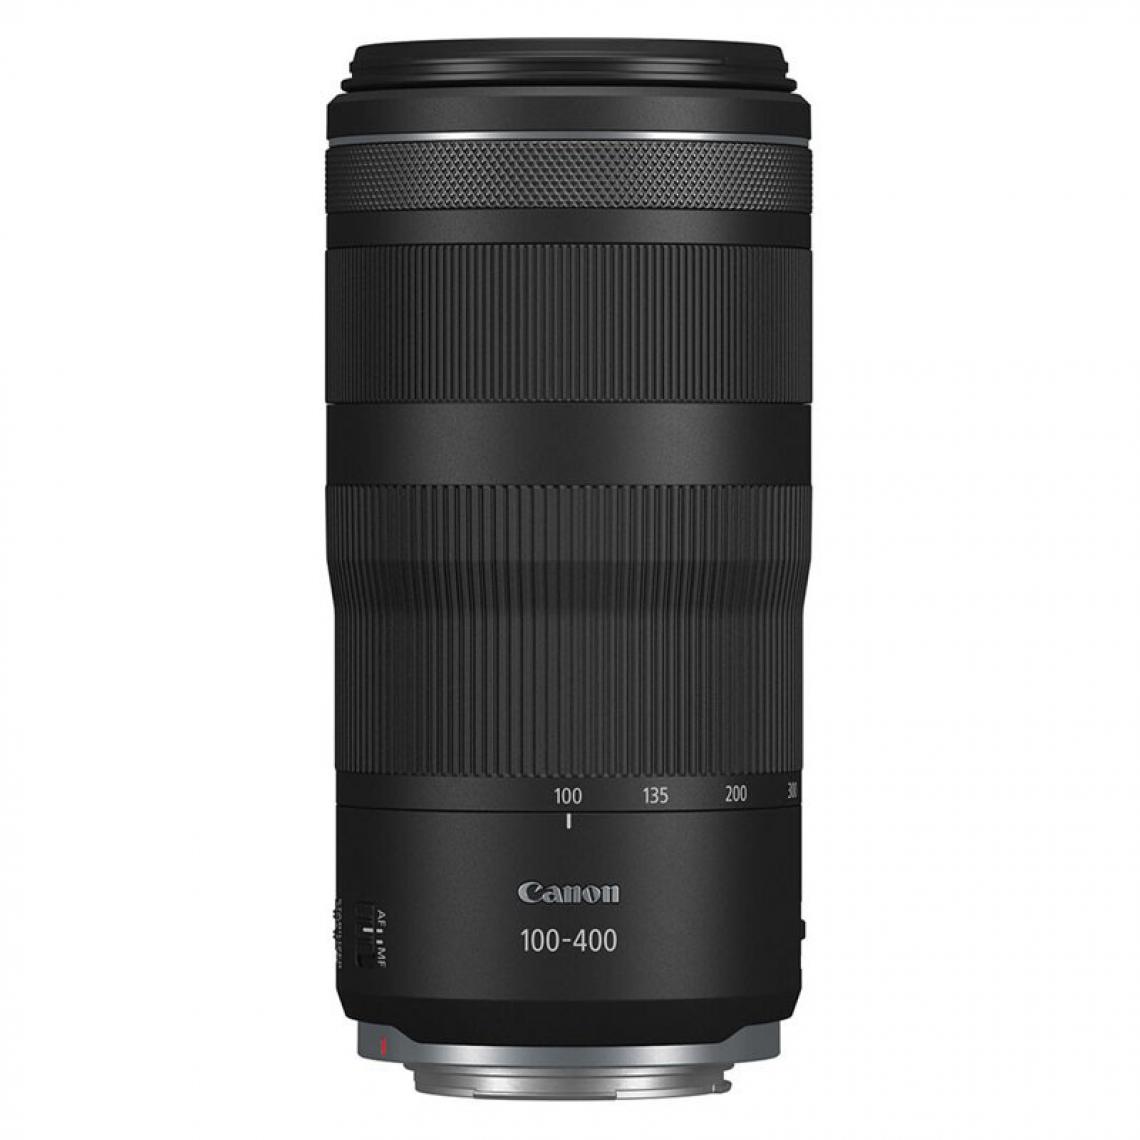 Canon - CANON Objectif RF 100-400mm F5.6-8 IS USM - Objectif Photo